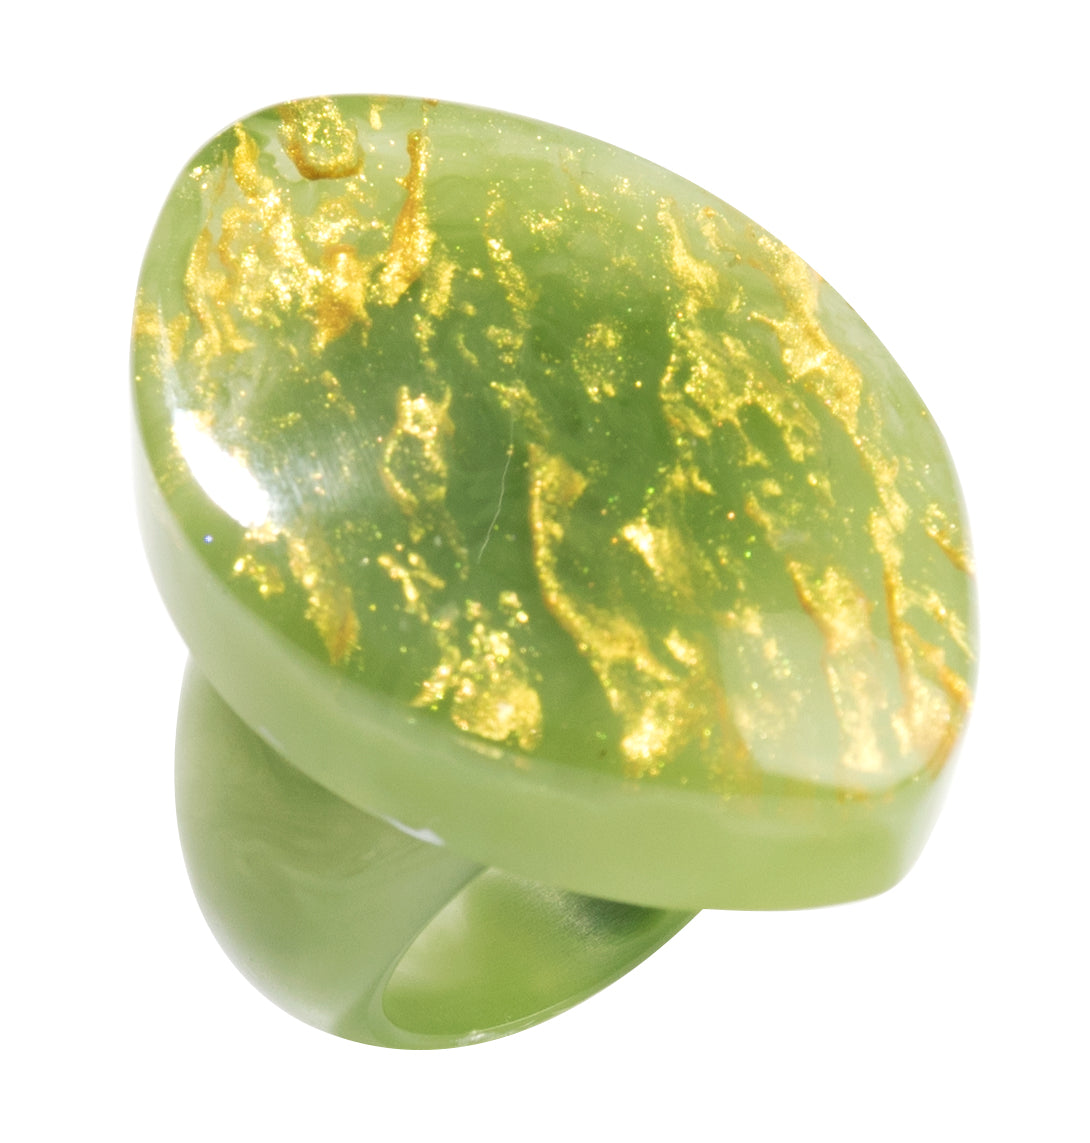 Zsiska Rhea Ring - Teal or Green with Gold Leaf Feature